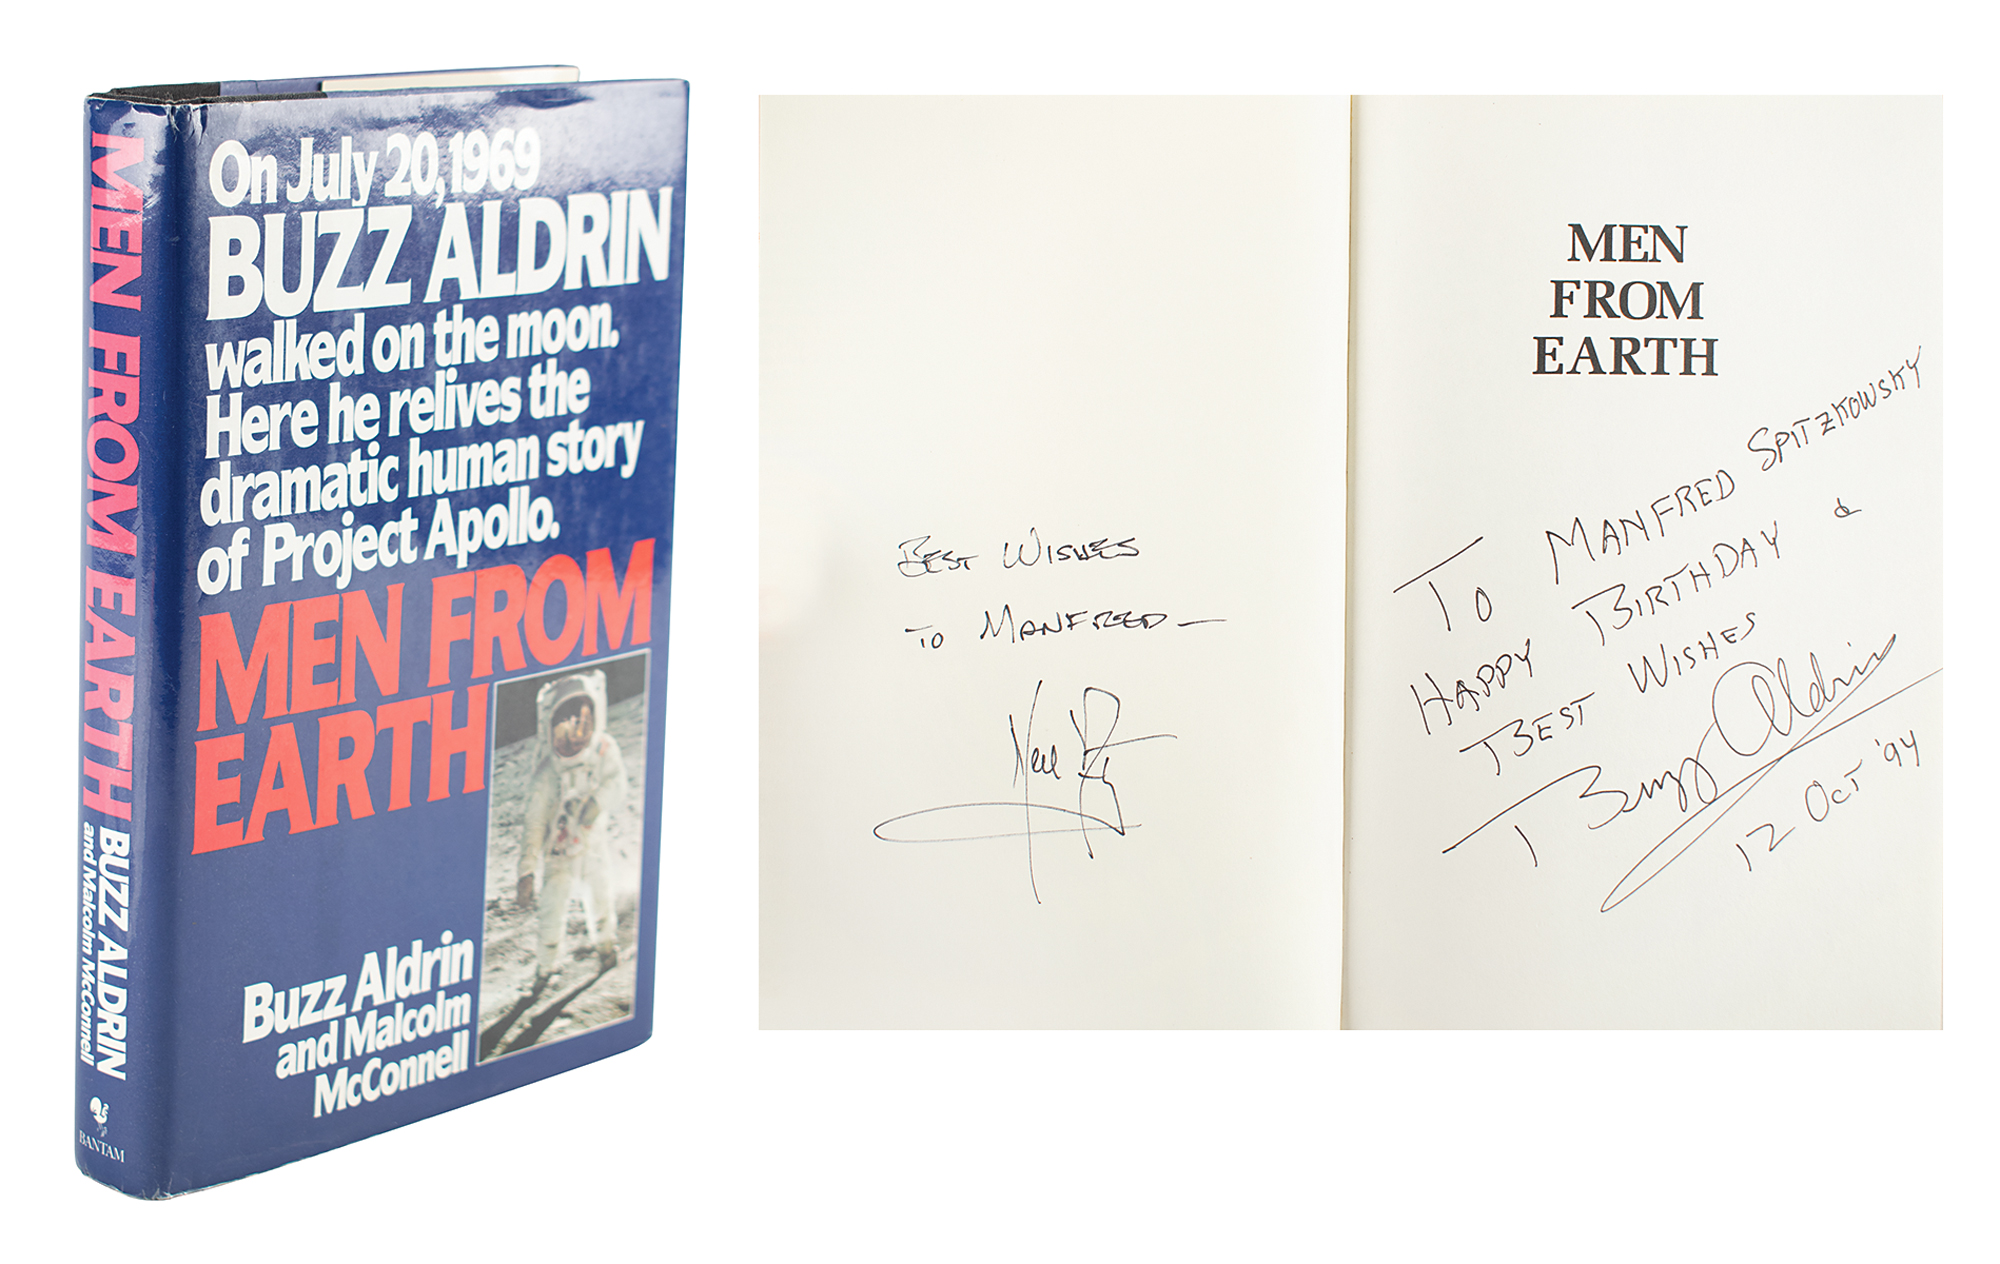 Lot #9263 Neil Armstrong and Buzz Aldrin Signed Book